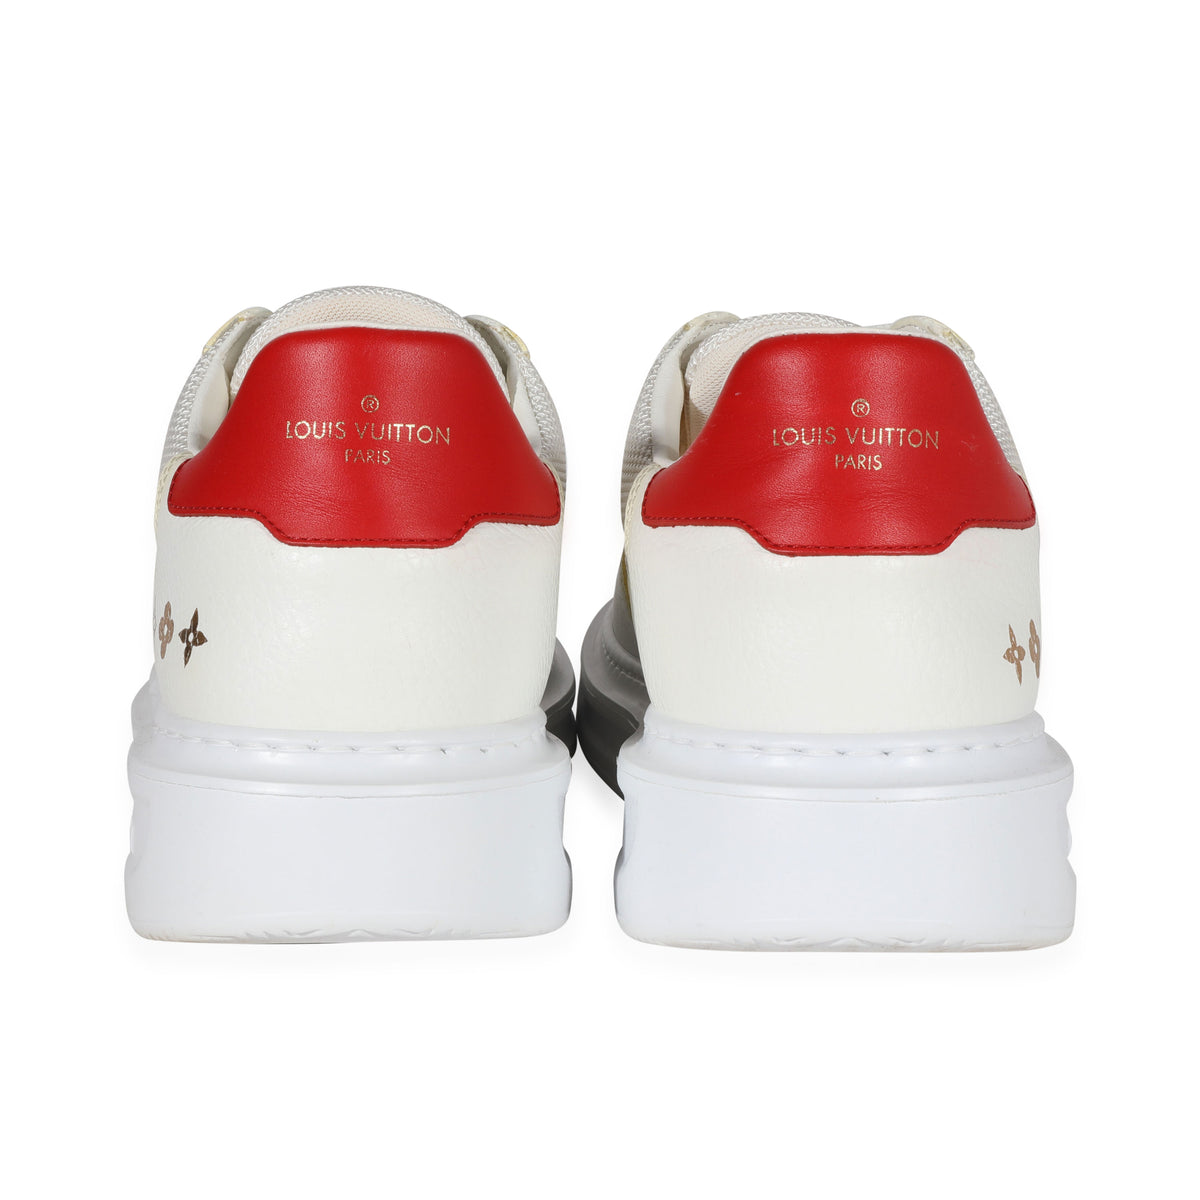 Beverly hills low trainers Louis Vuitton White size 7 UK in Other